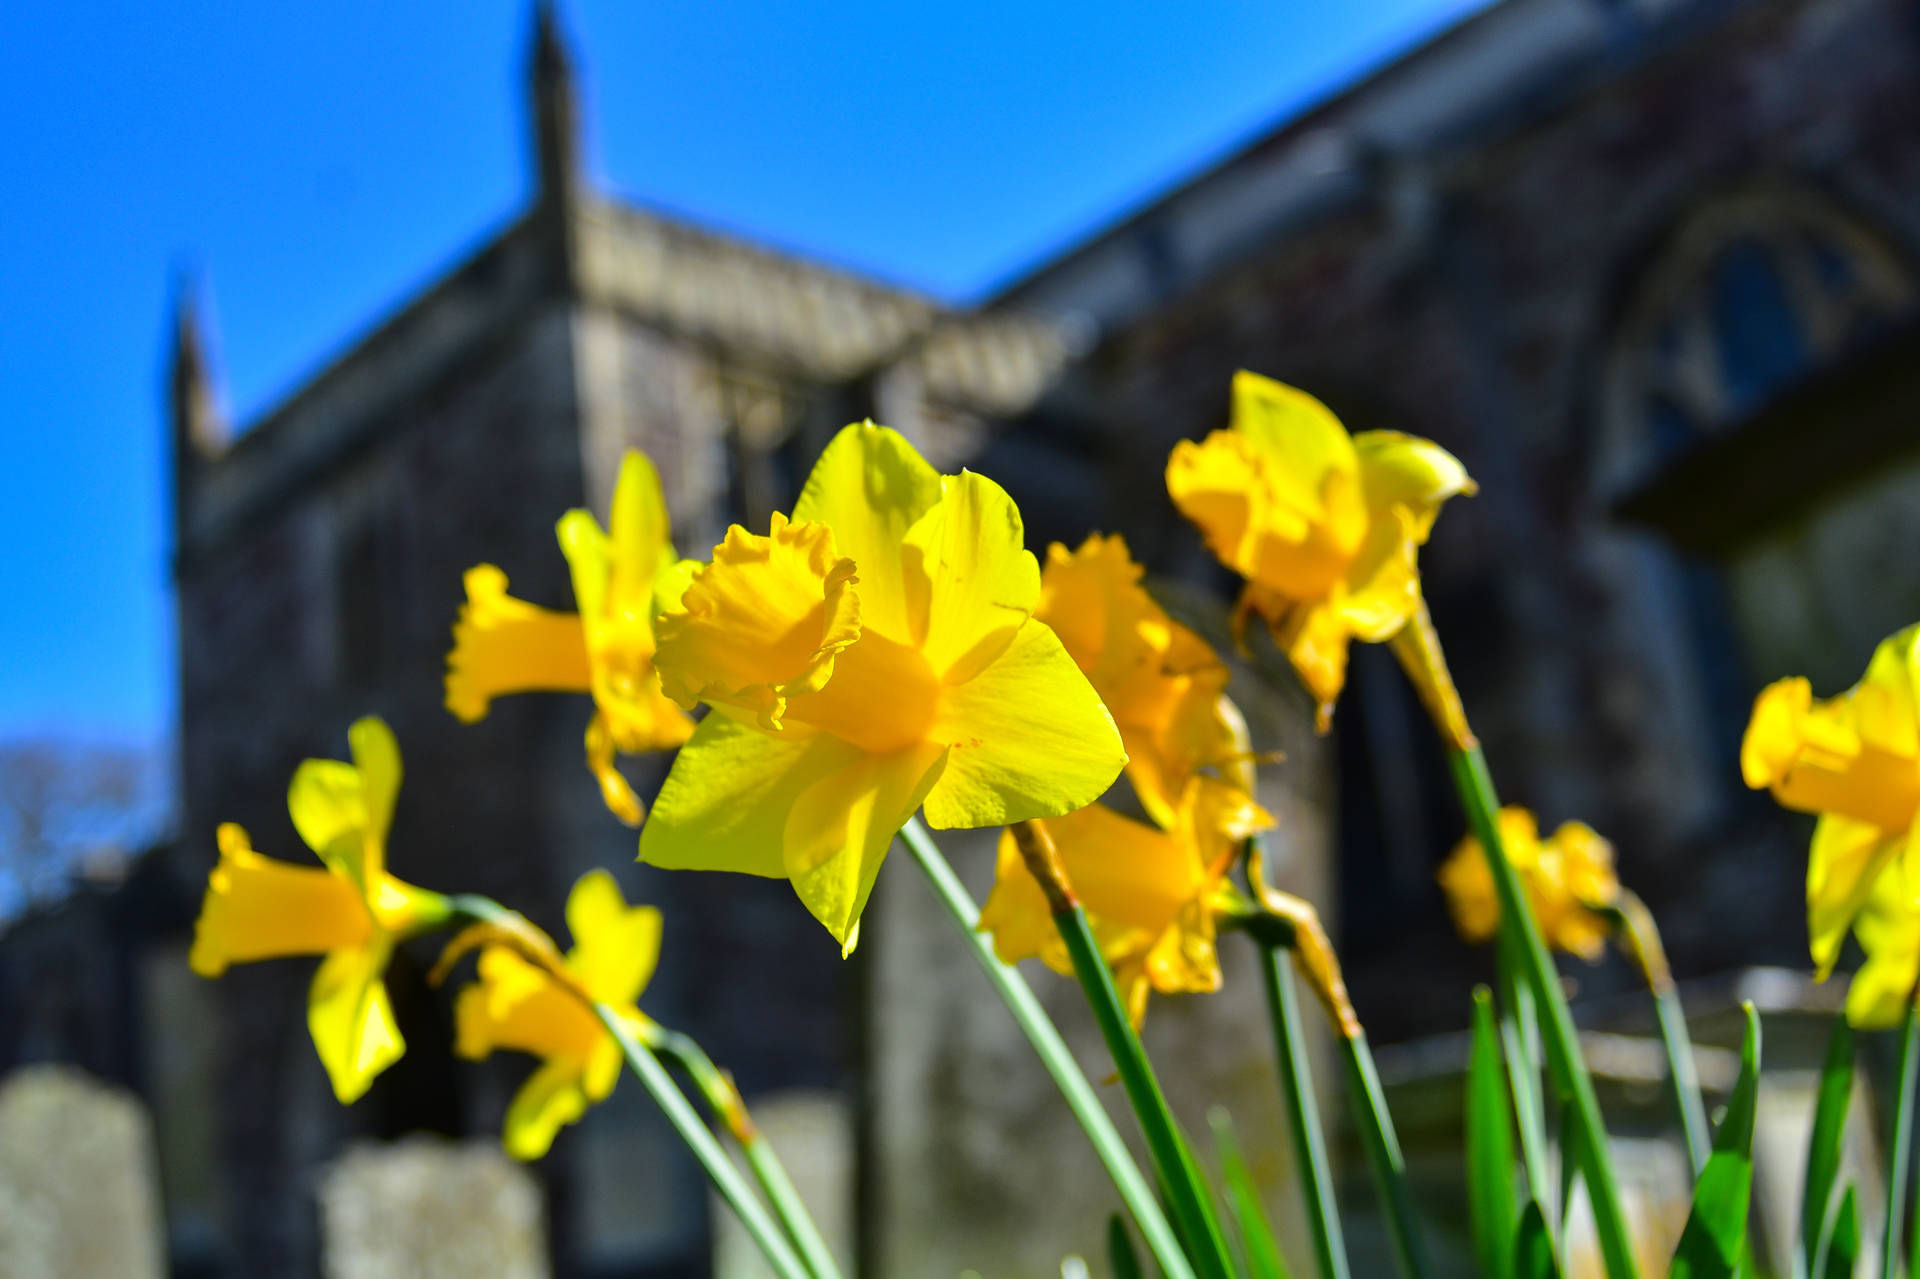 Daffodils At Blurred Castle Wall Background